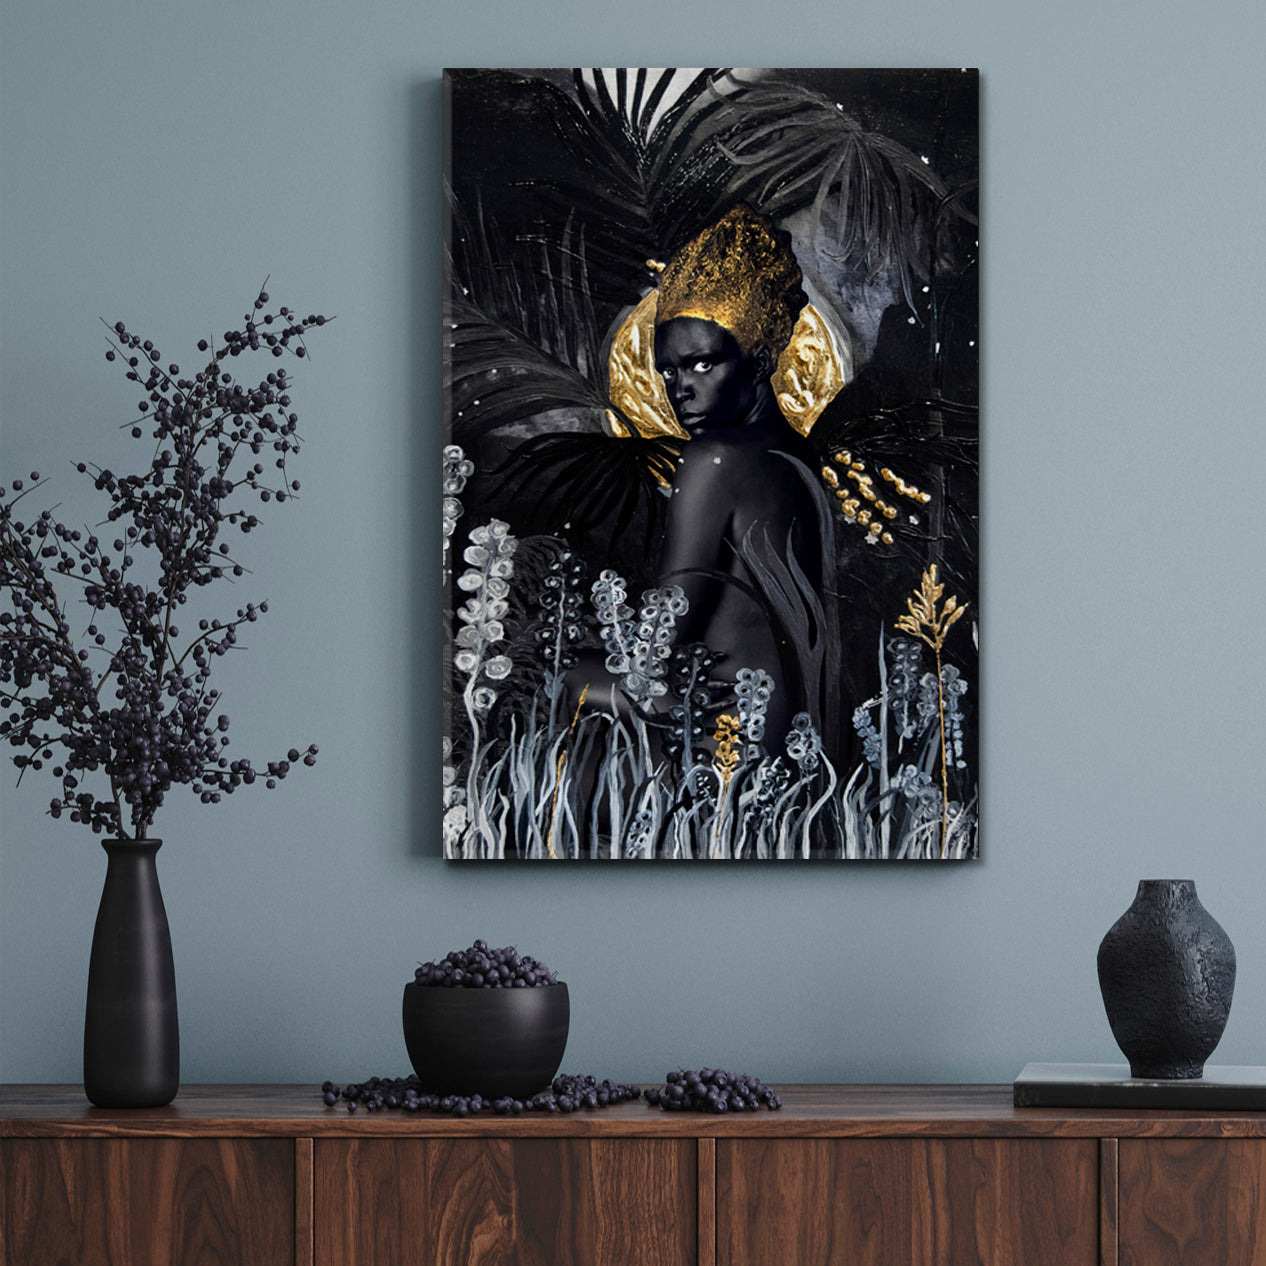 DARK TESTAMENT BLACK AND GOLD Woman Mind-Blowing Abstract Surreal Fine Art Artesty 1 Panel 16"x24" 